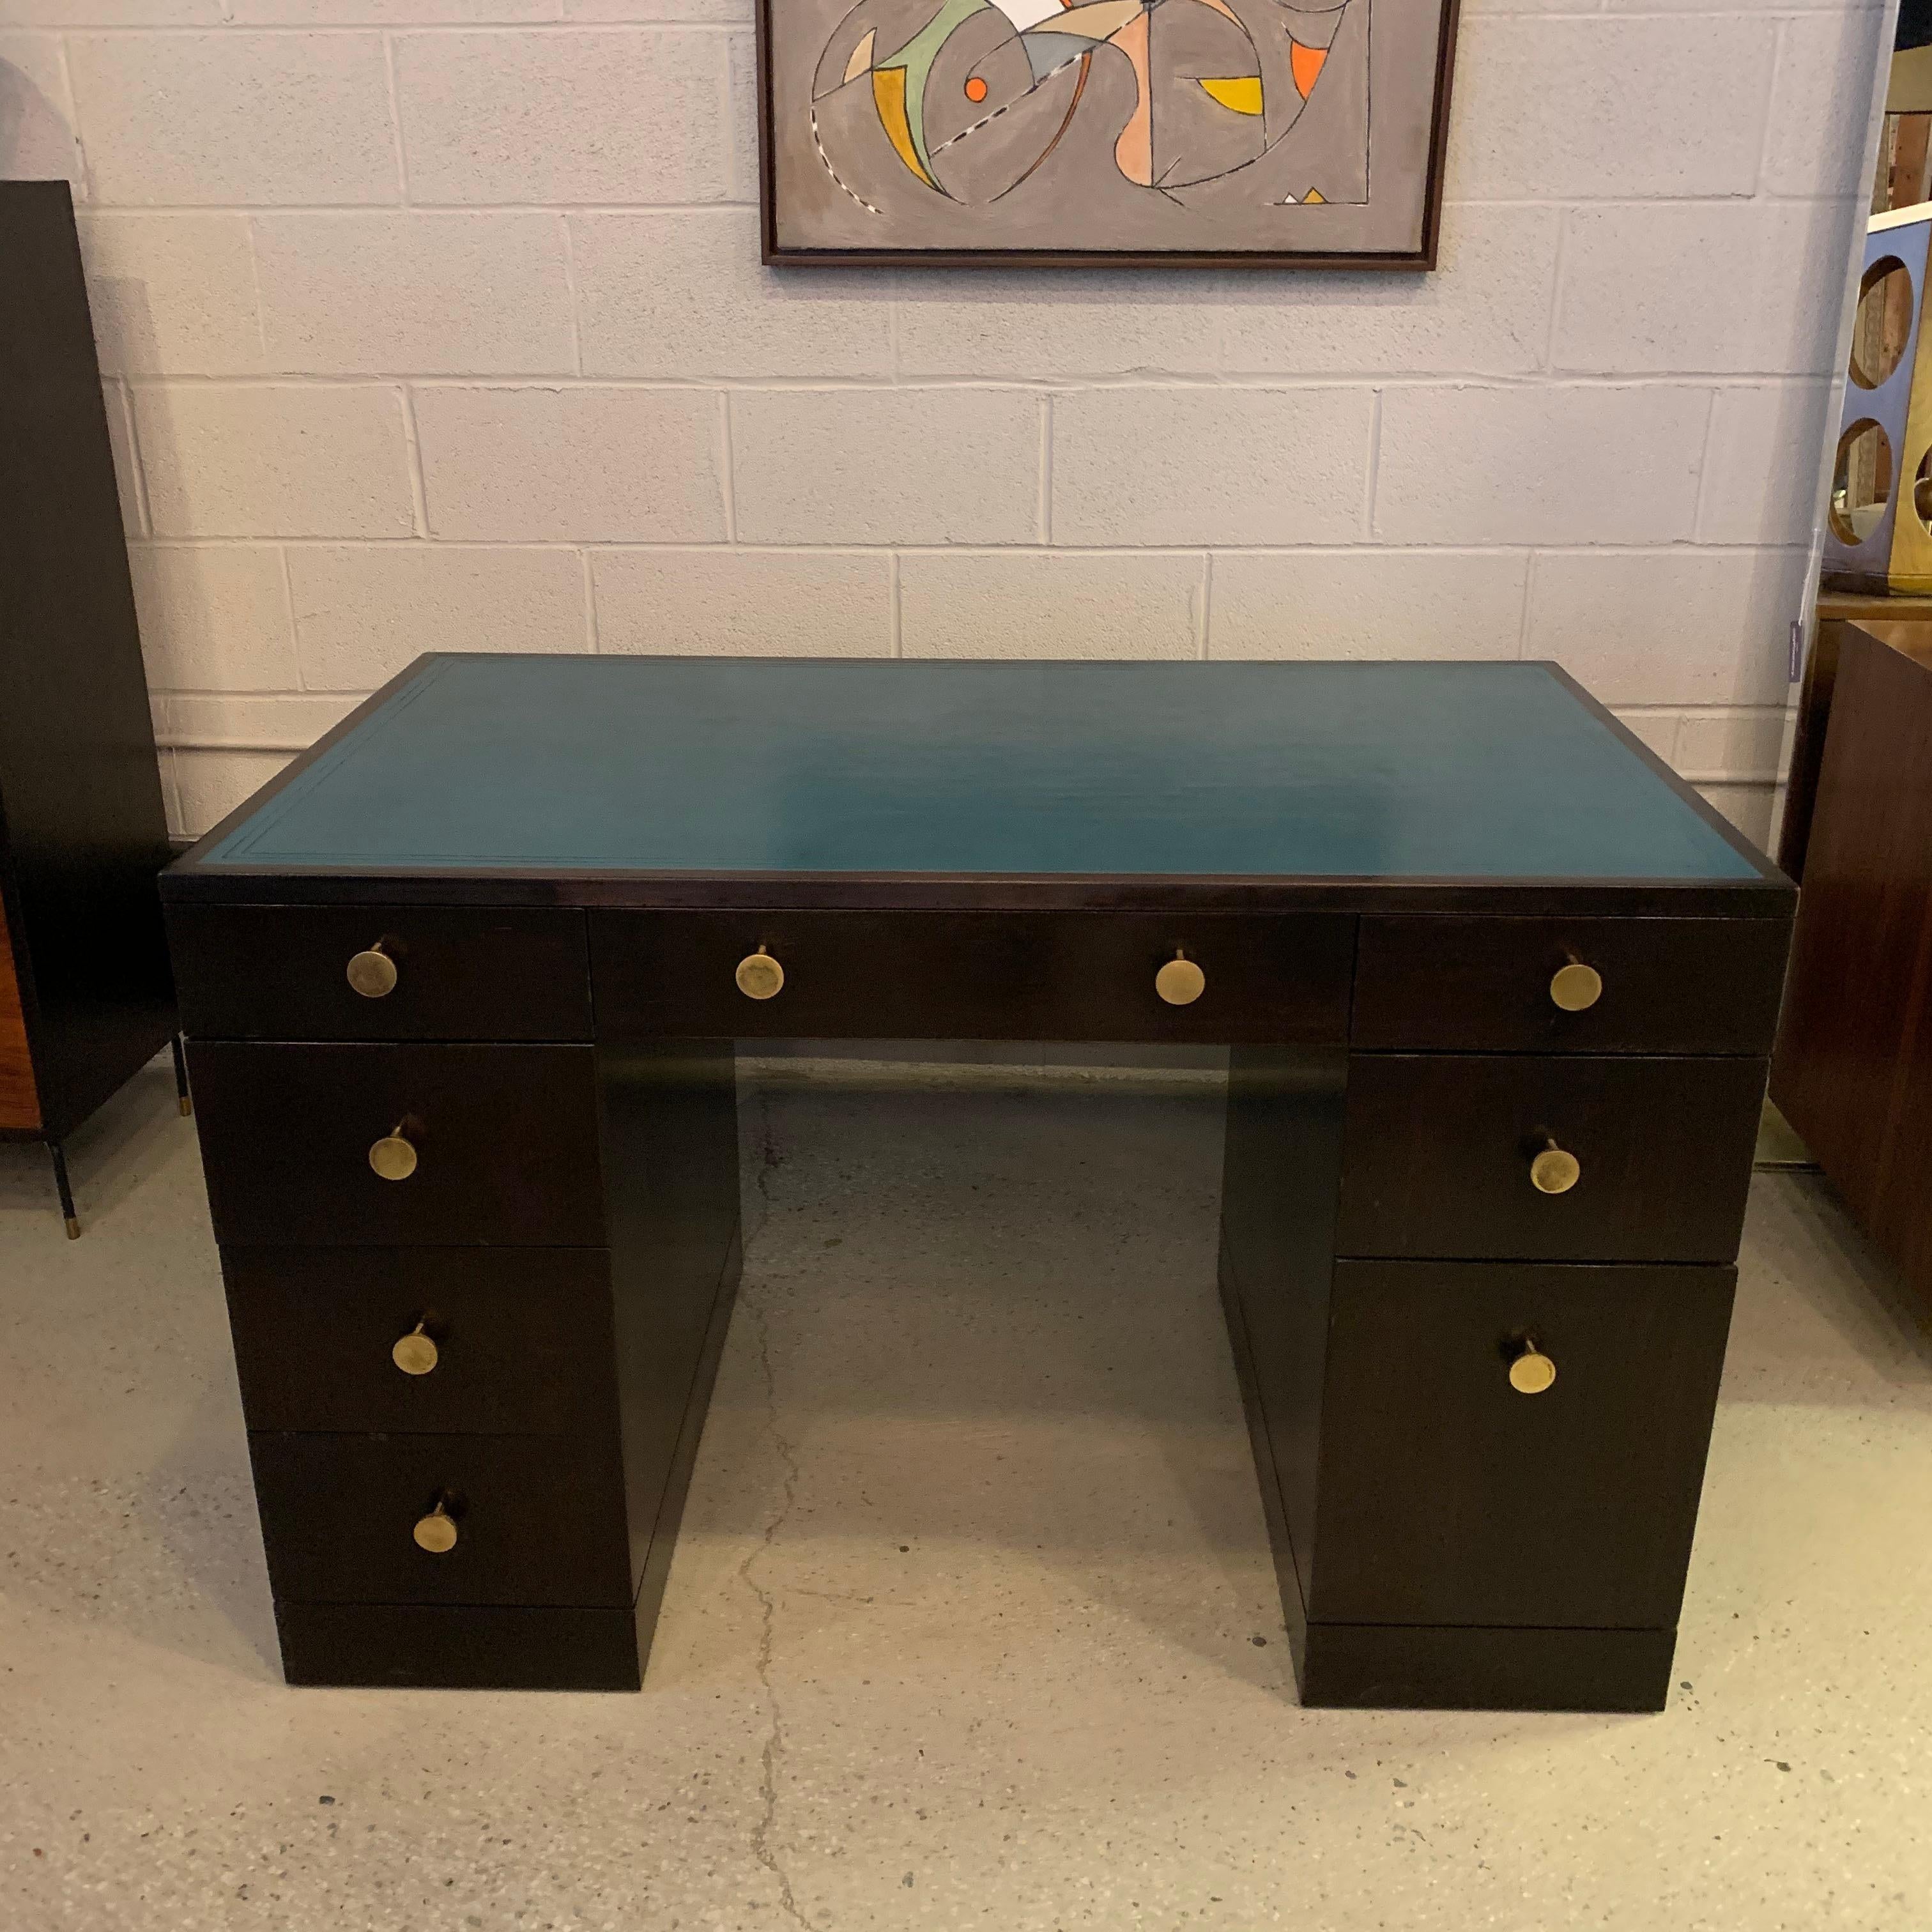 Small yet stately, black lacquered rosewood desk by Edward Wormley for Dunbar circa 1950s features a scored turquoise green/blue leather top with fantastic brass pulls. The desk has 8 drawers, some with dividers, with the lower right one able to